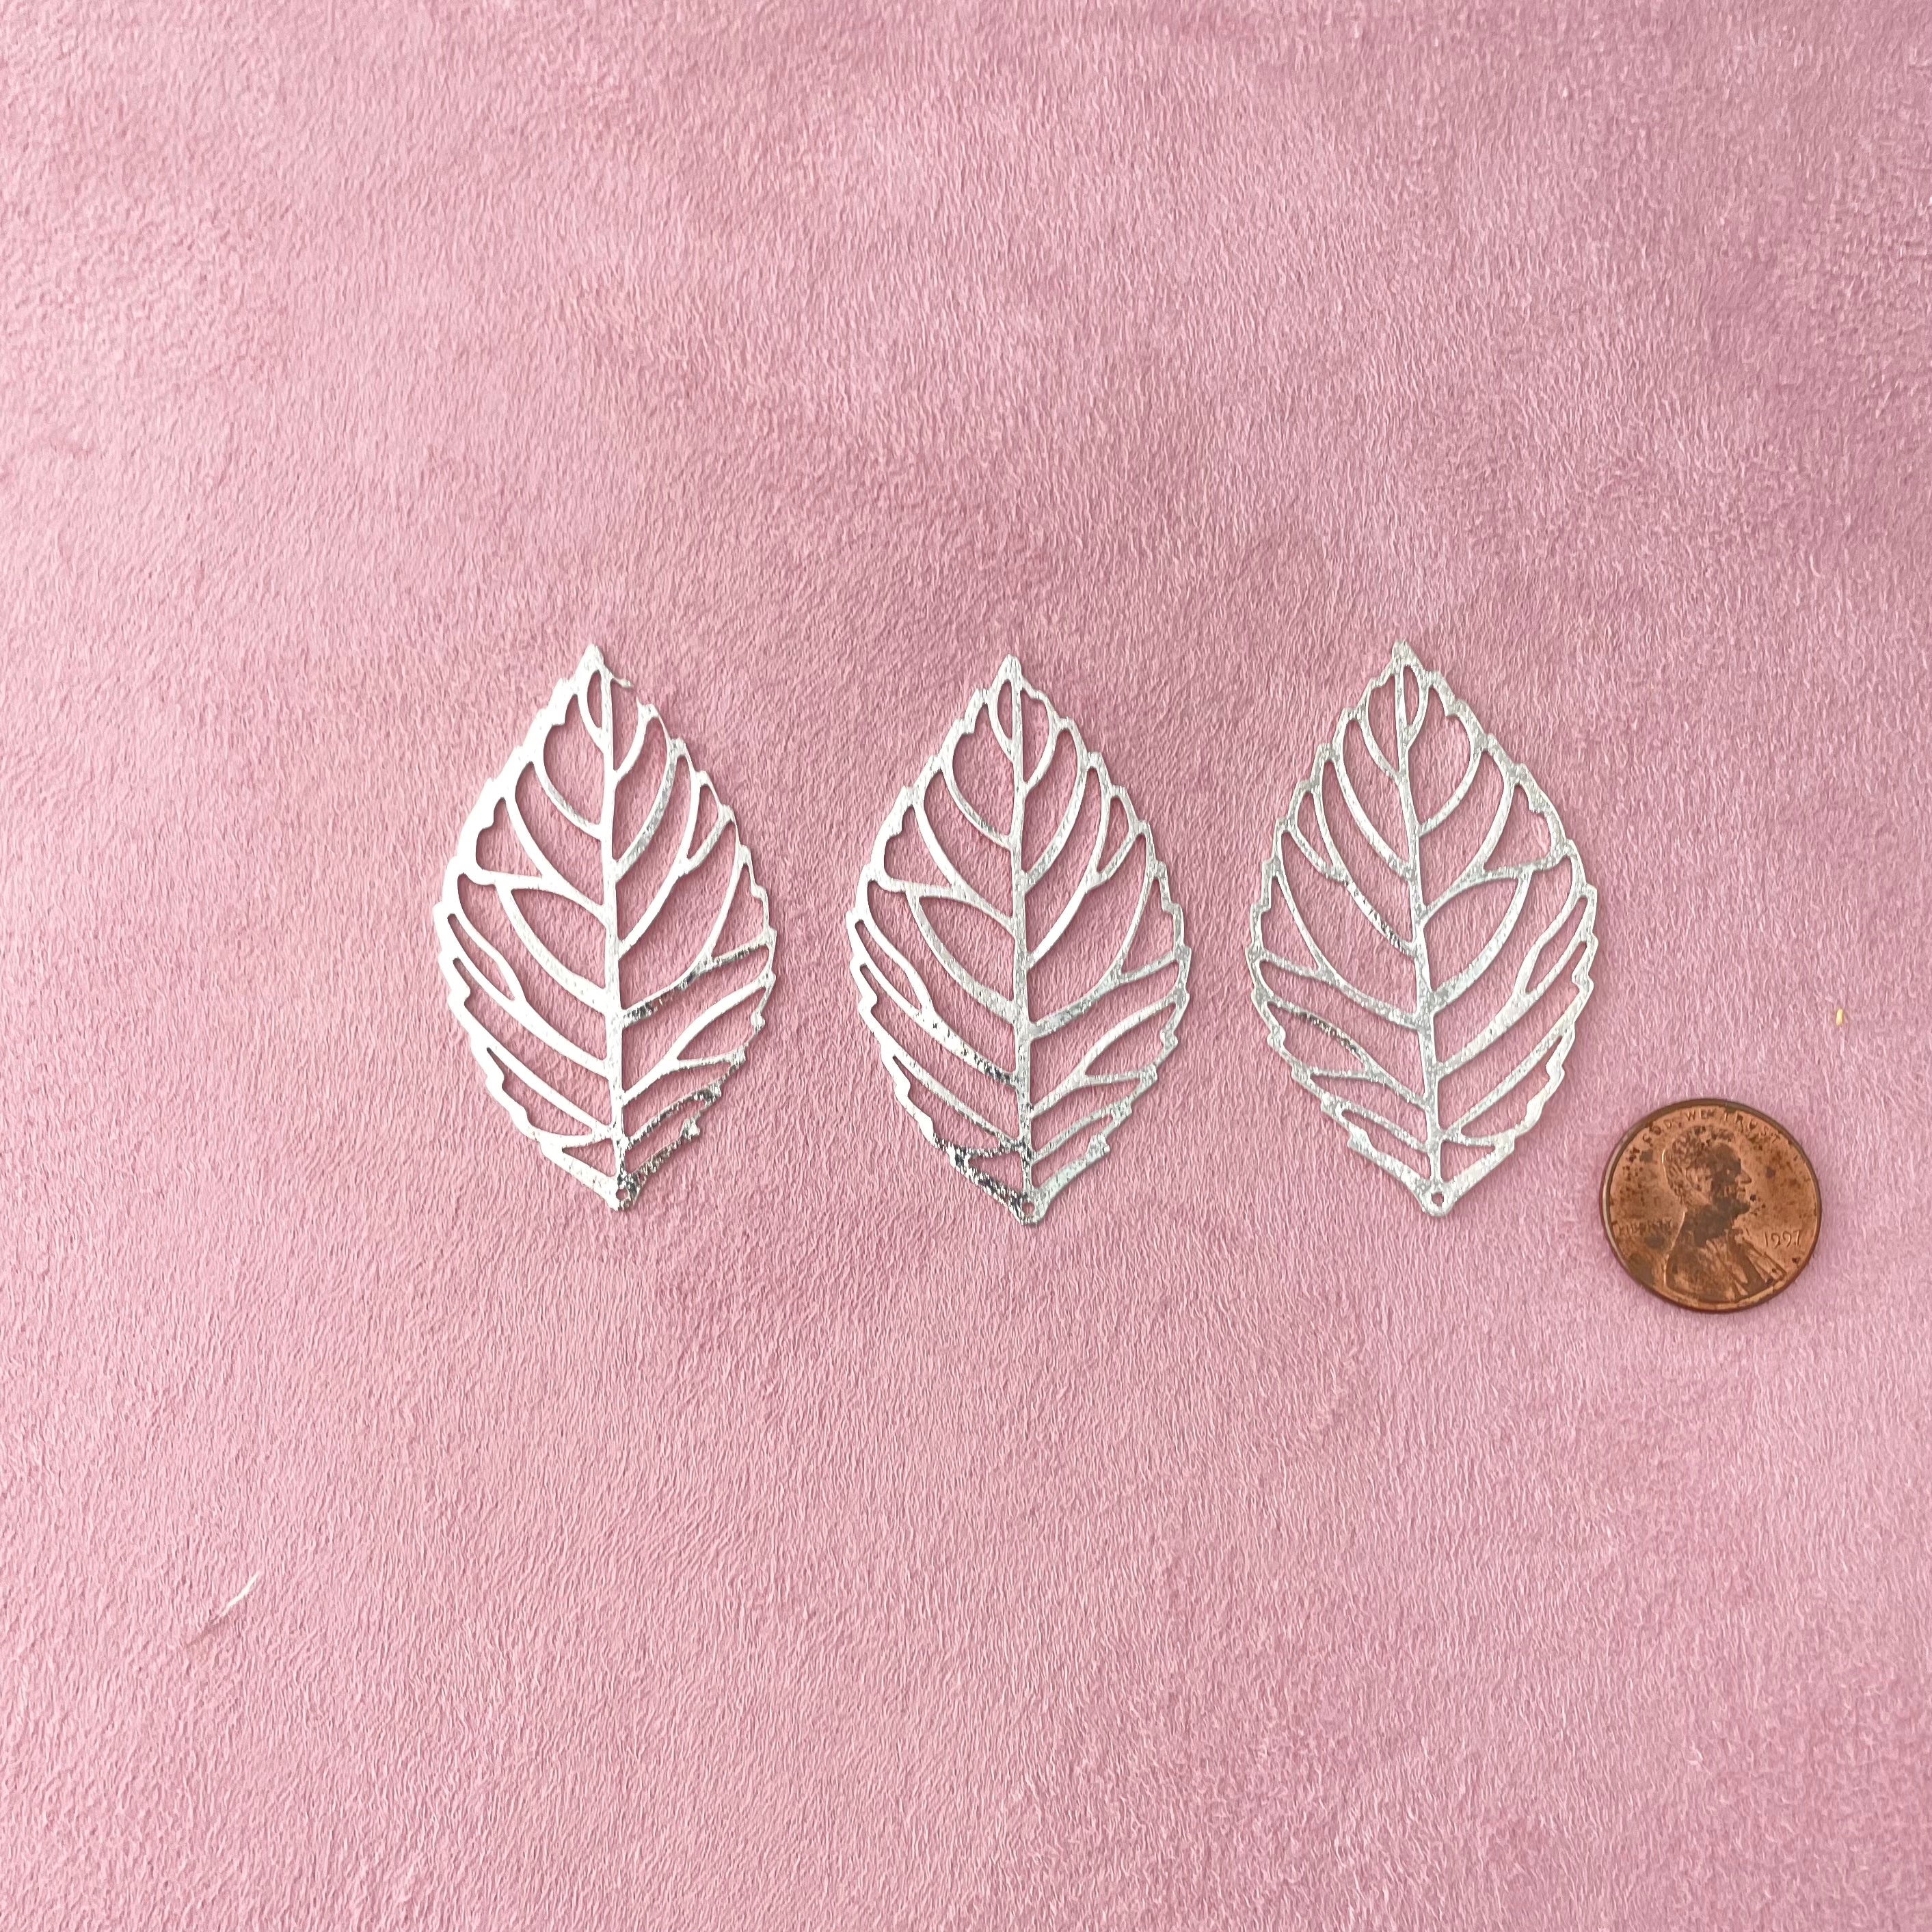 3 silver styling leaves with penny beside for size reference - wedding flat lay props from Champagne & GRIT